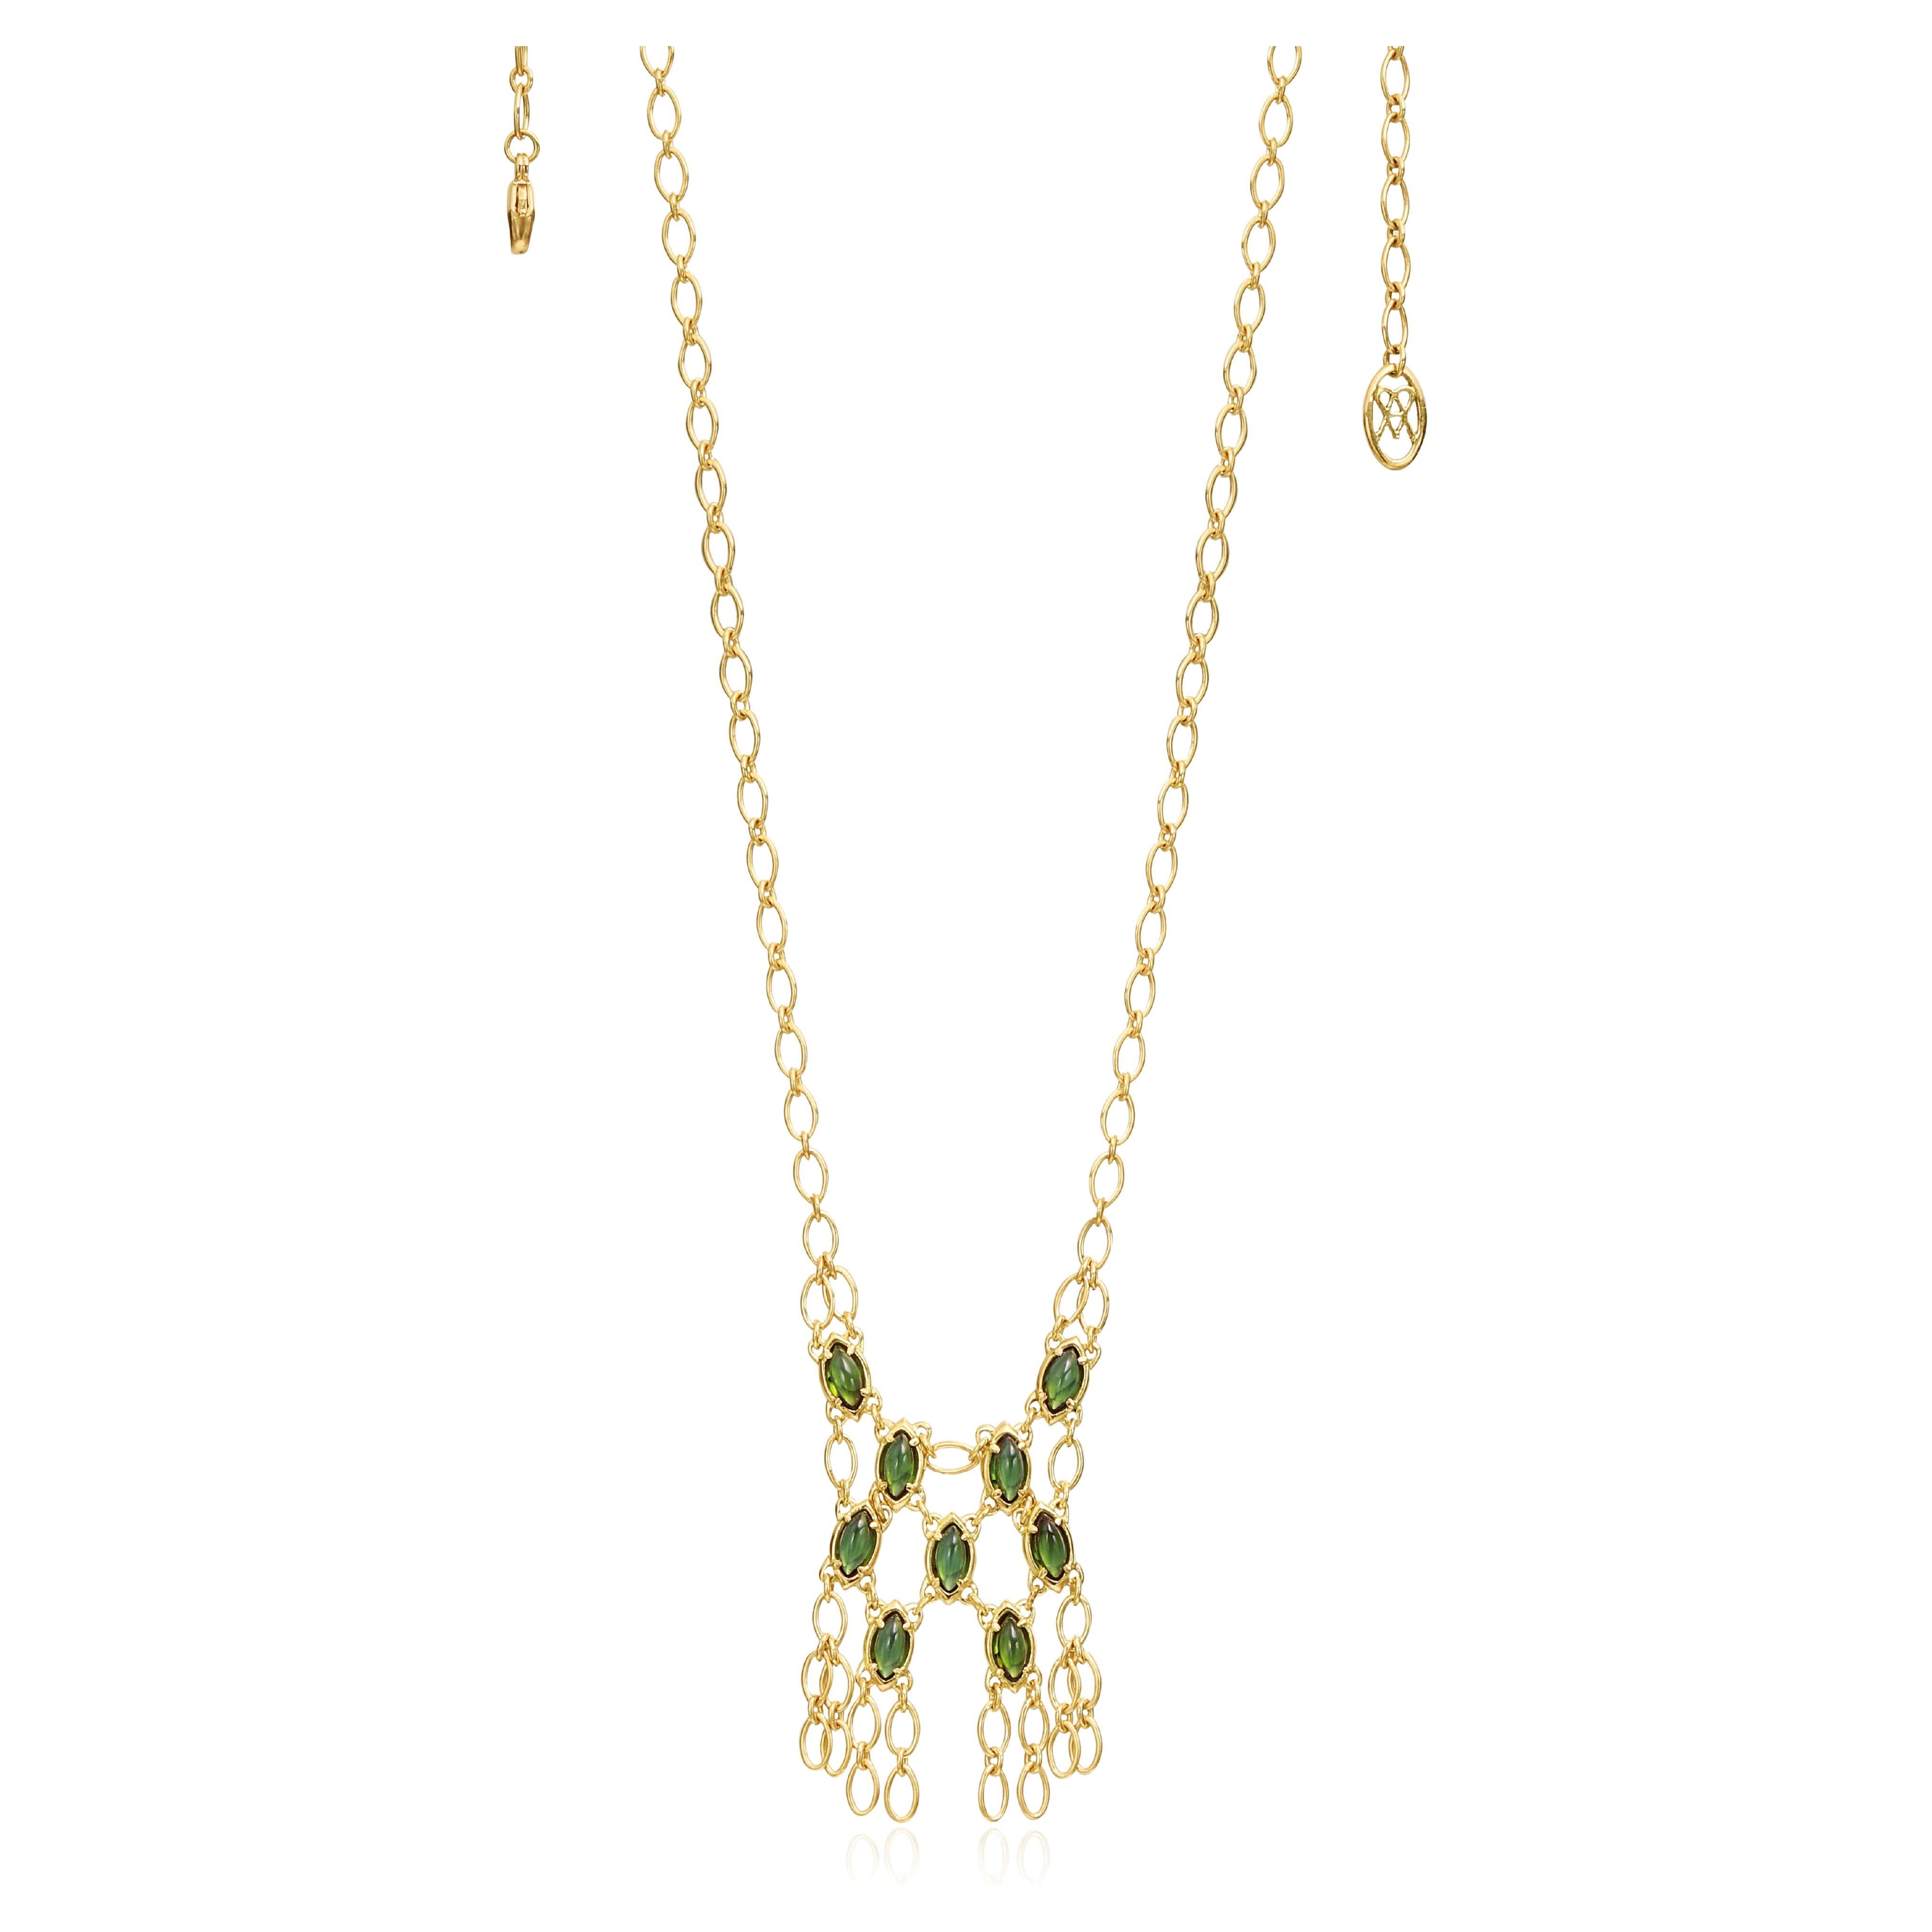 18kt Gold Mesh Chain Pendant Necklace with Green Tourmaline Marquise Cabochon